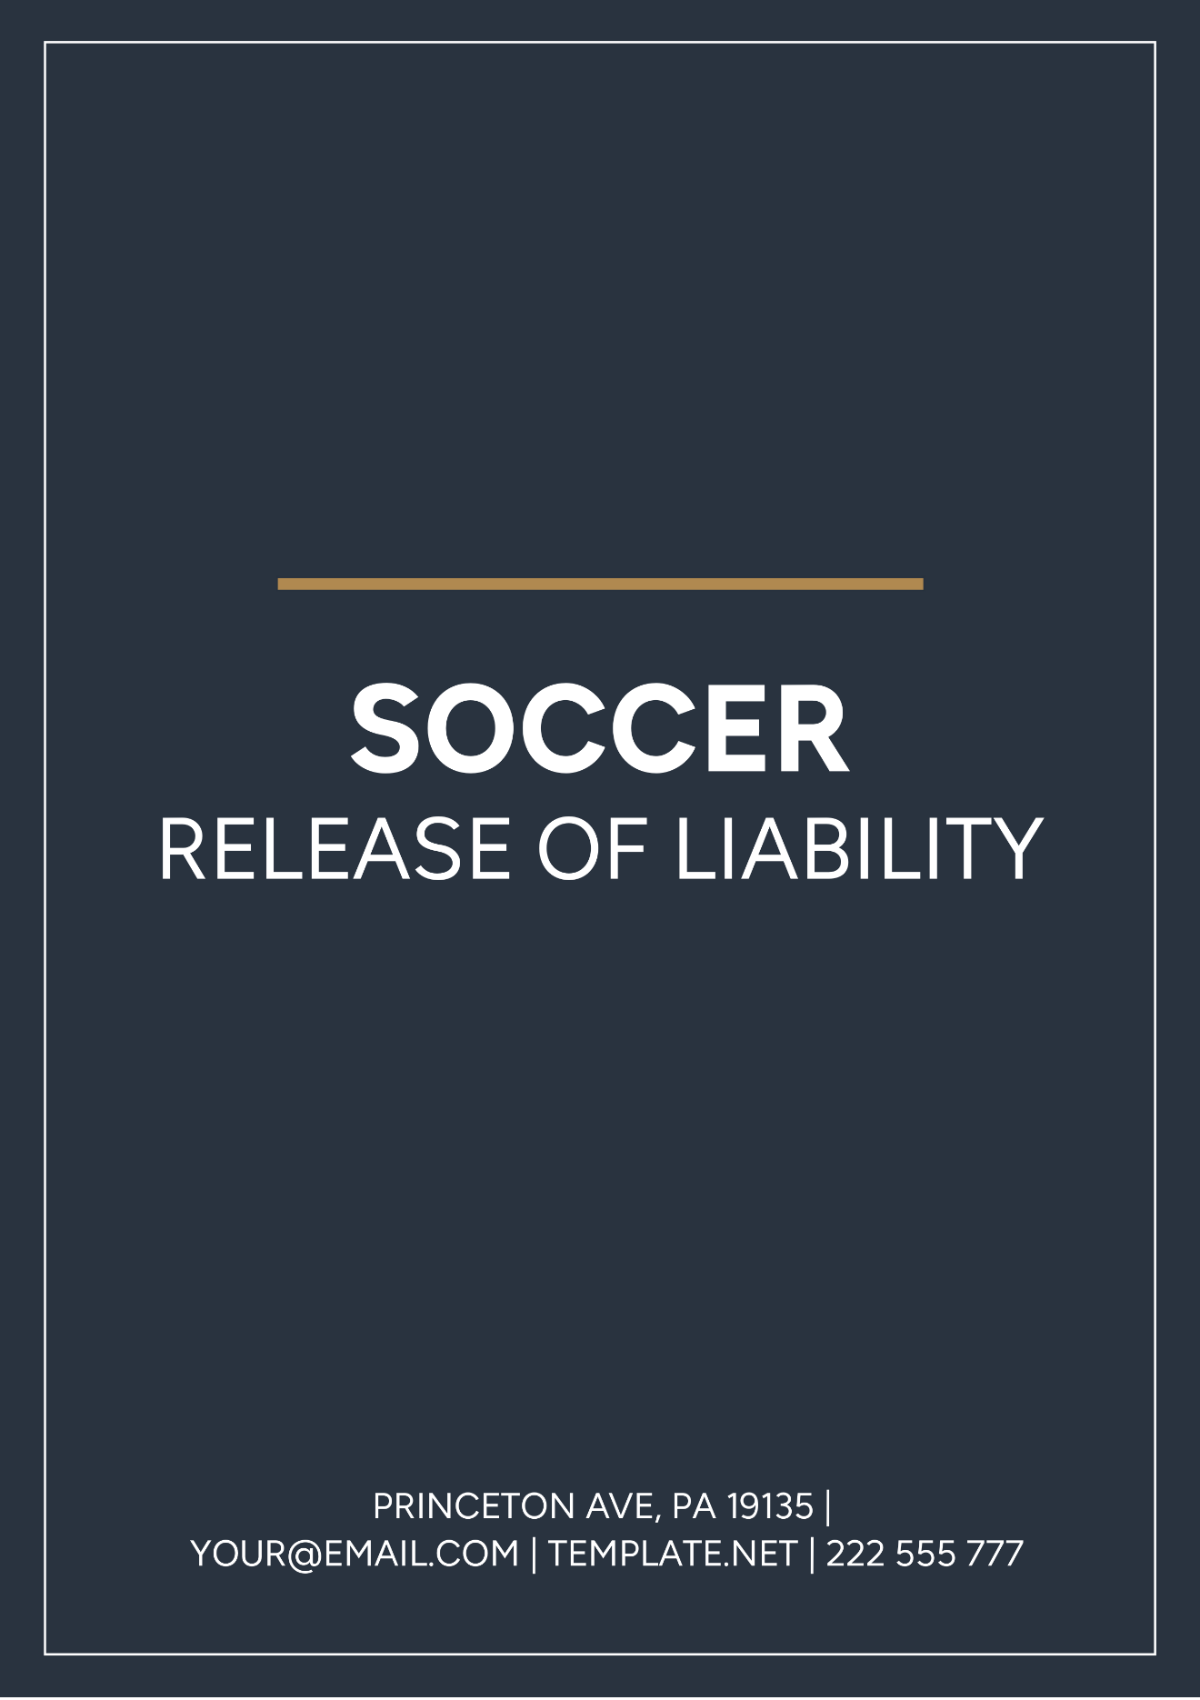 Free Soccer Release of Liability Template